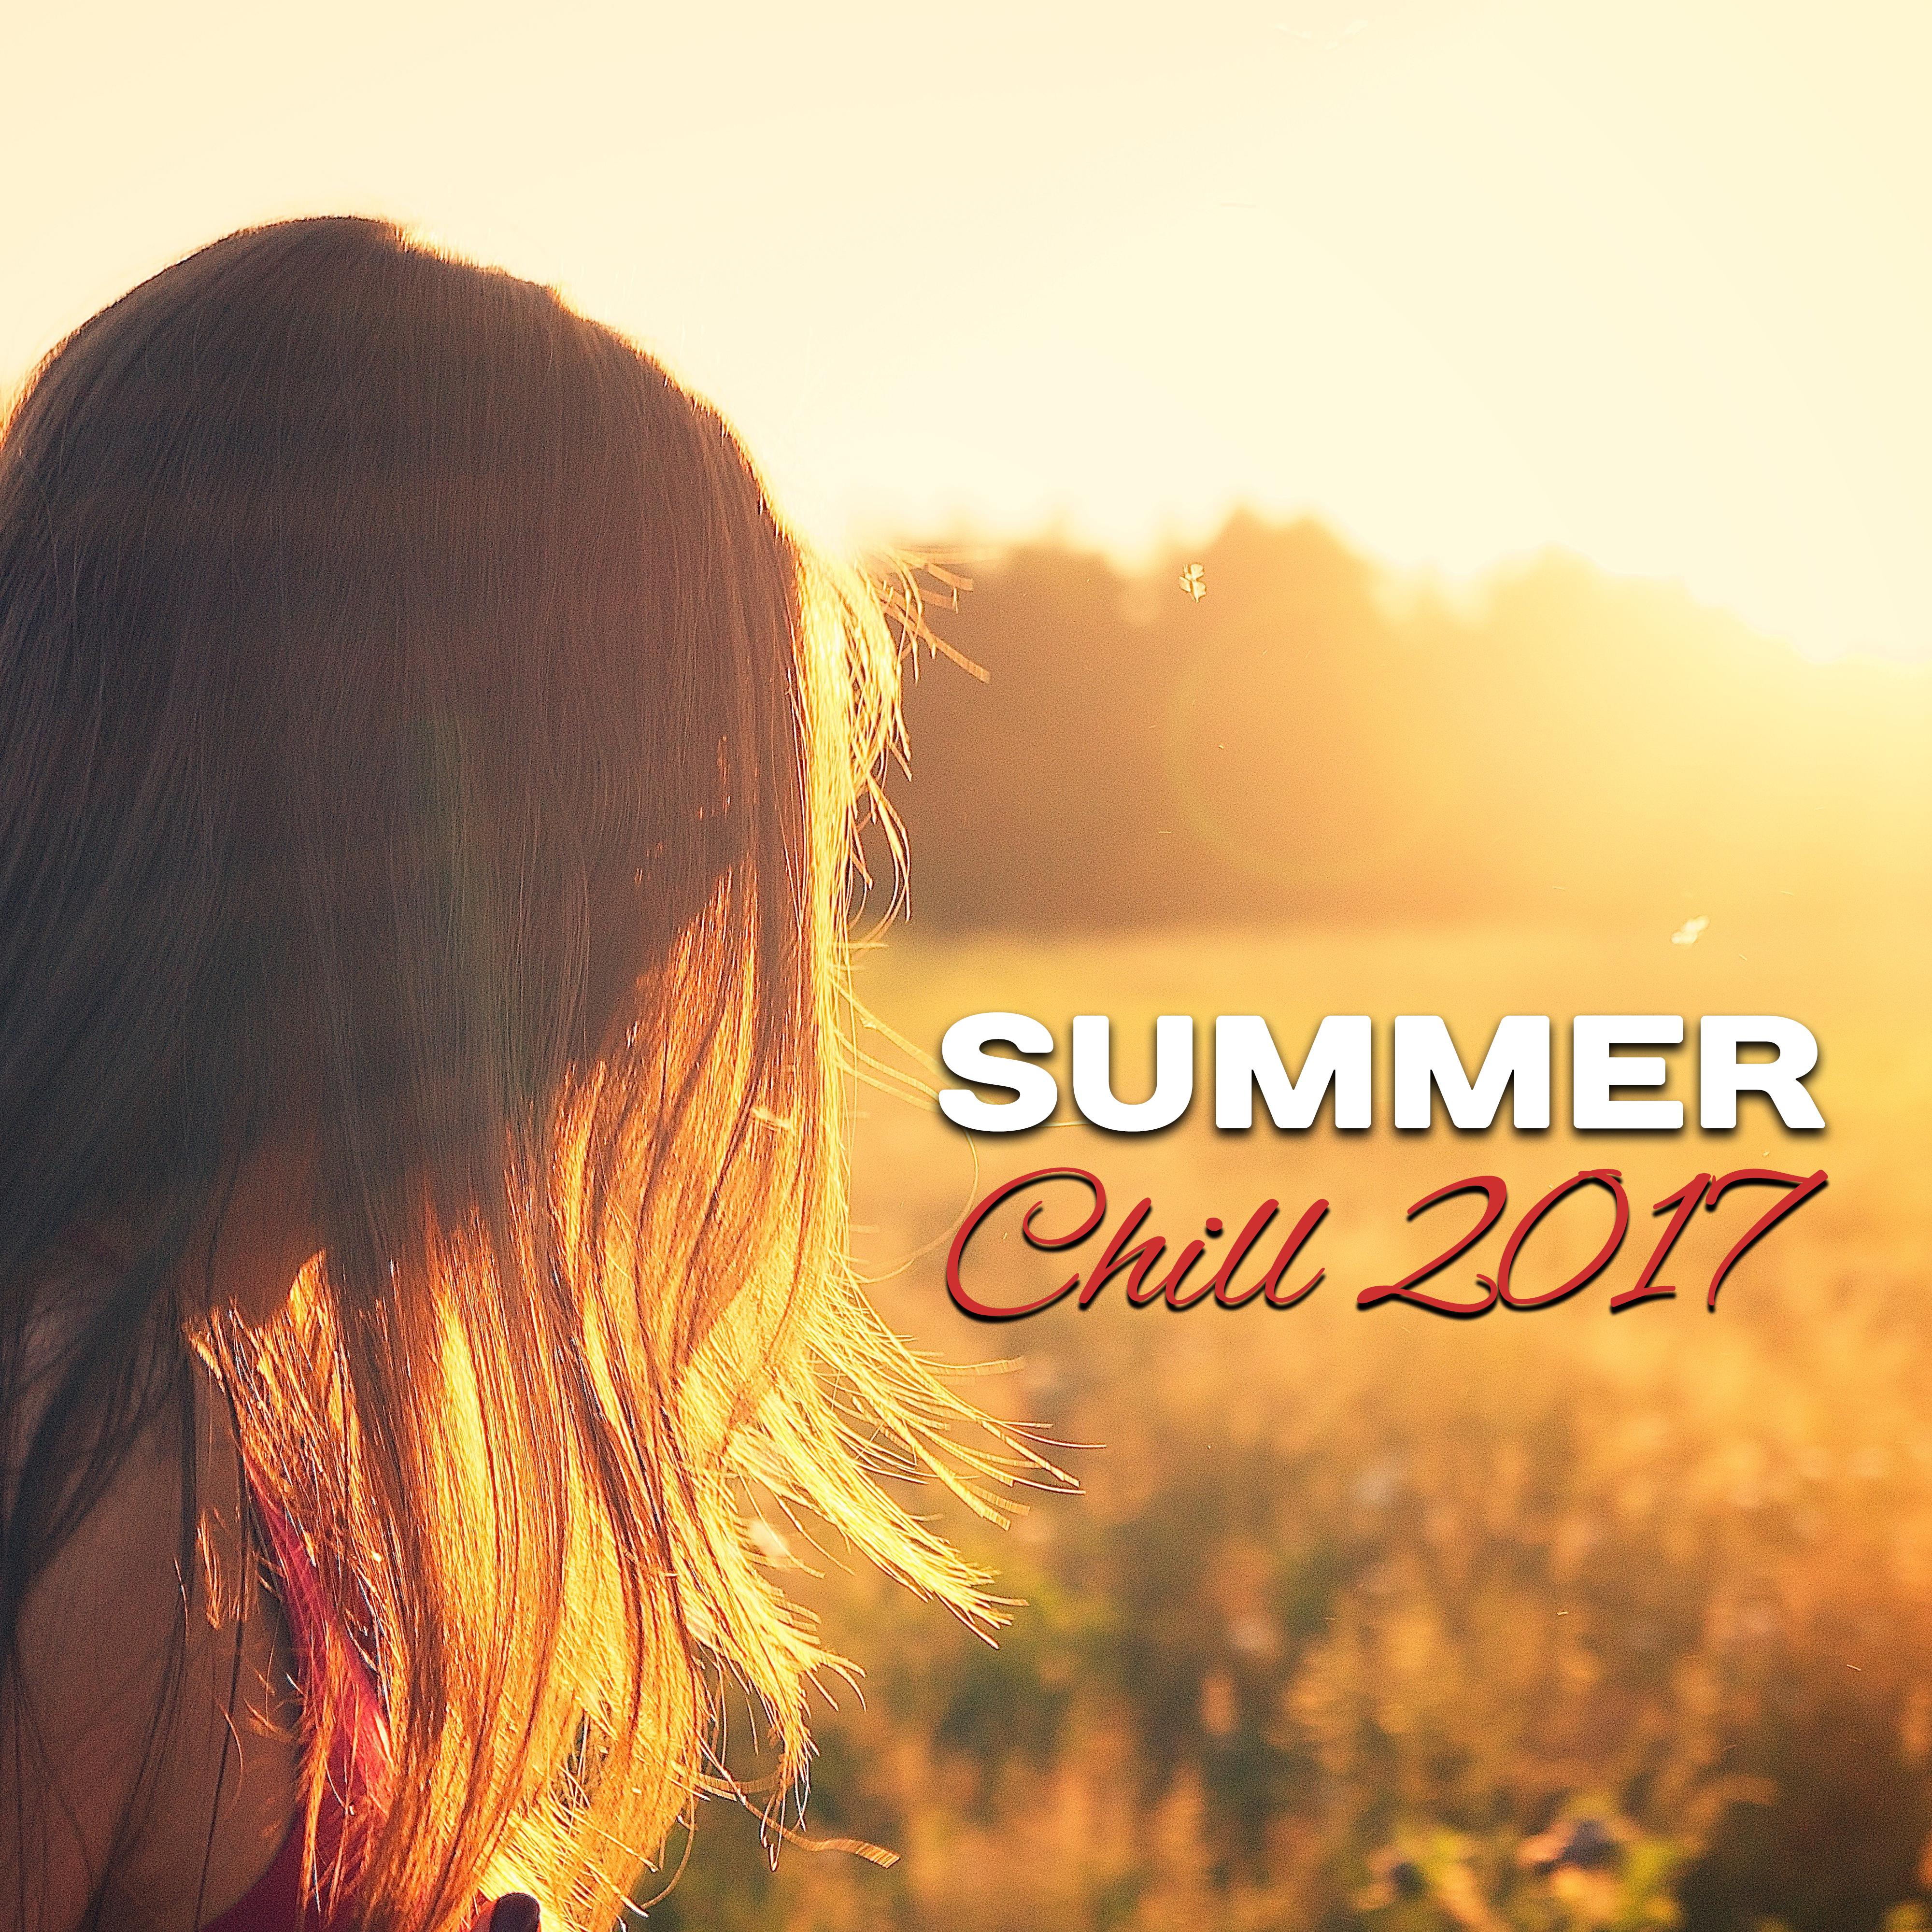 Summer Chill 2017 – Holiday Songs, Hot Vibes, Rest with Chill Out Music, Waves of Calmness